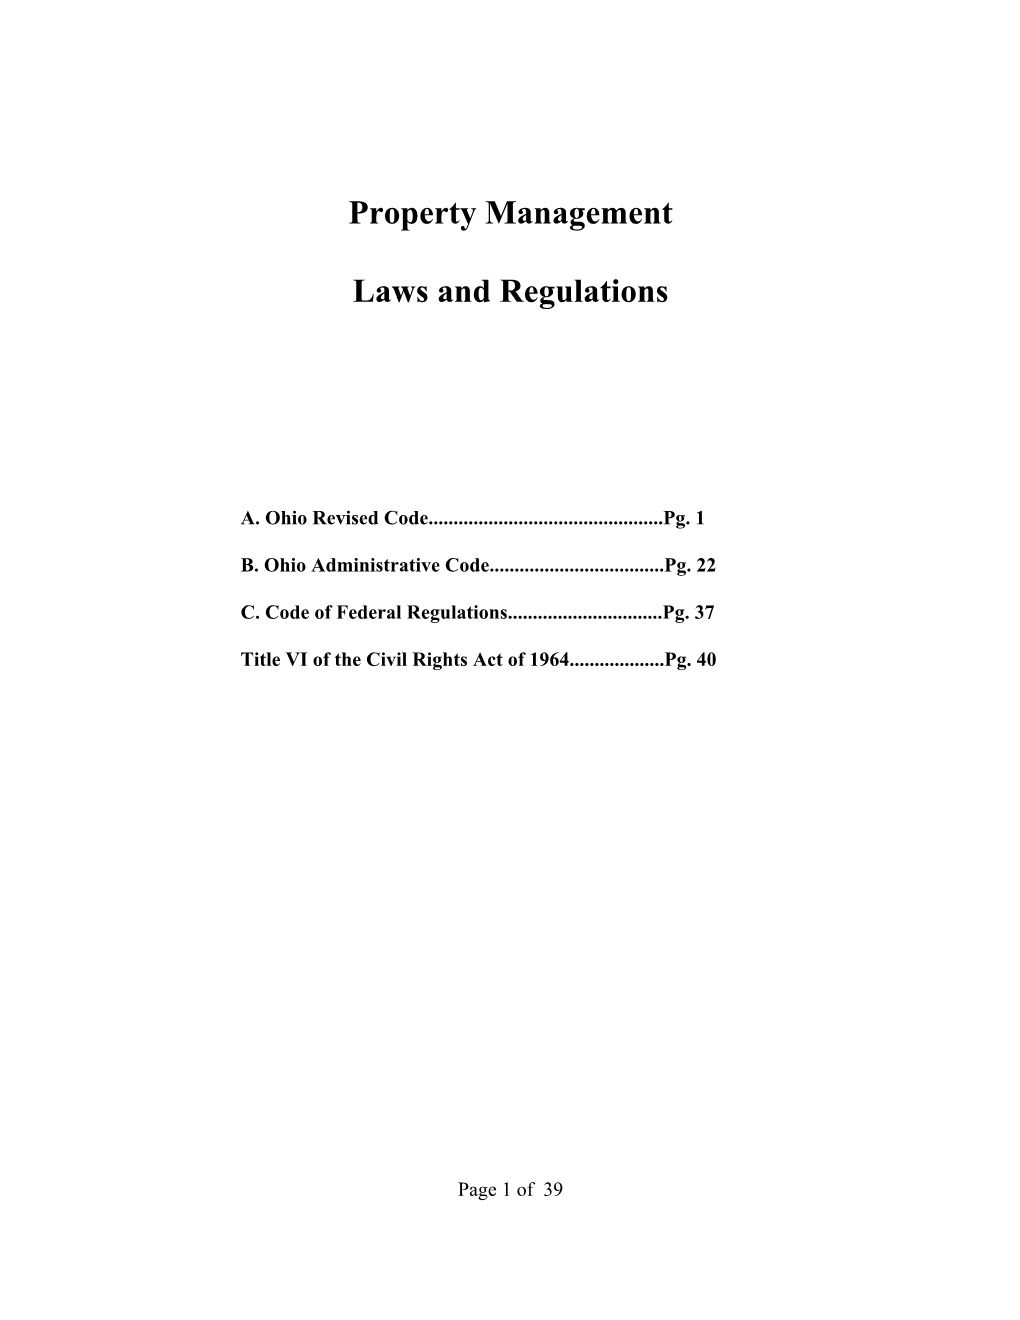 Property Management Laws and Regulations